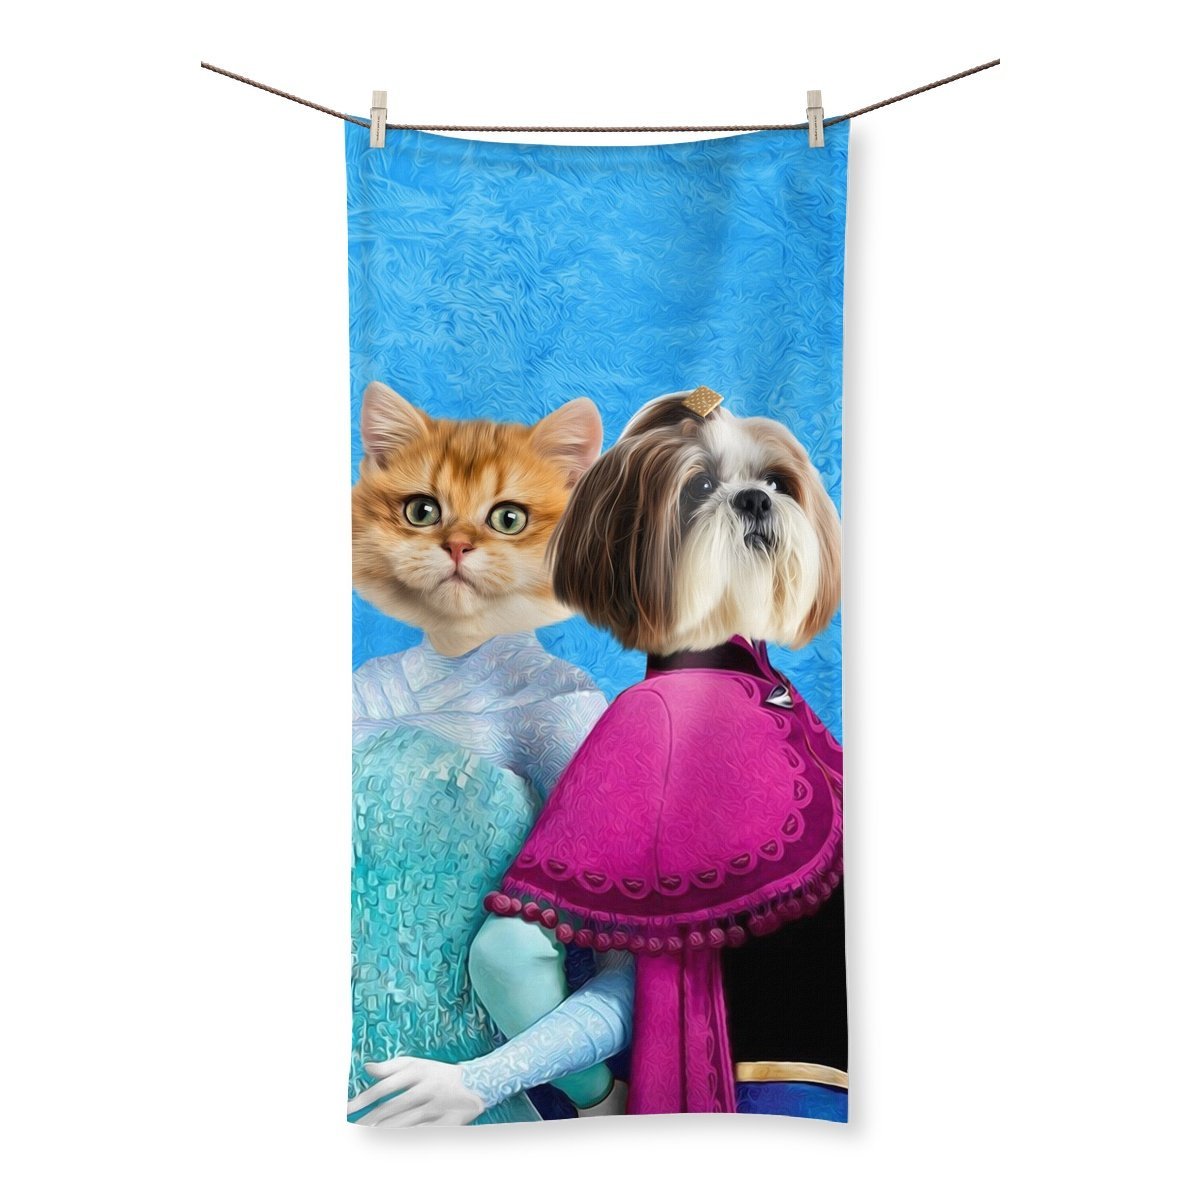 Snow Sisters (Frozen Inspired): Custom Pet Towel - Paw & Glory - #pet portraits# - #dog portraits# - #pet portraits uk#Paw & Glory, pawandglory, dog and couple portrait, digital dog portraits, admiral dog portrait, cat picture painting, hogwarts dog houses, custom dog painting, pet portrait,custom pet portrait Towel